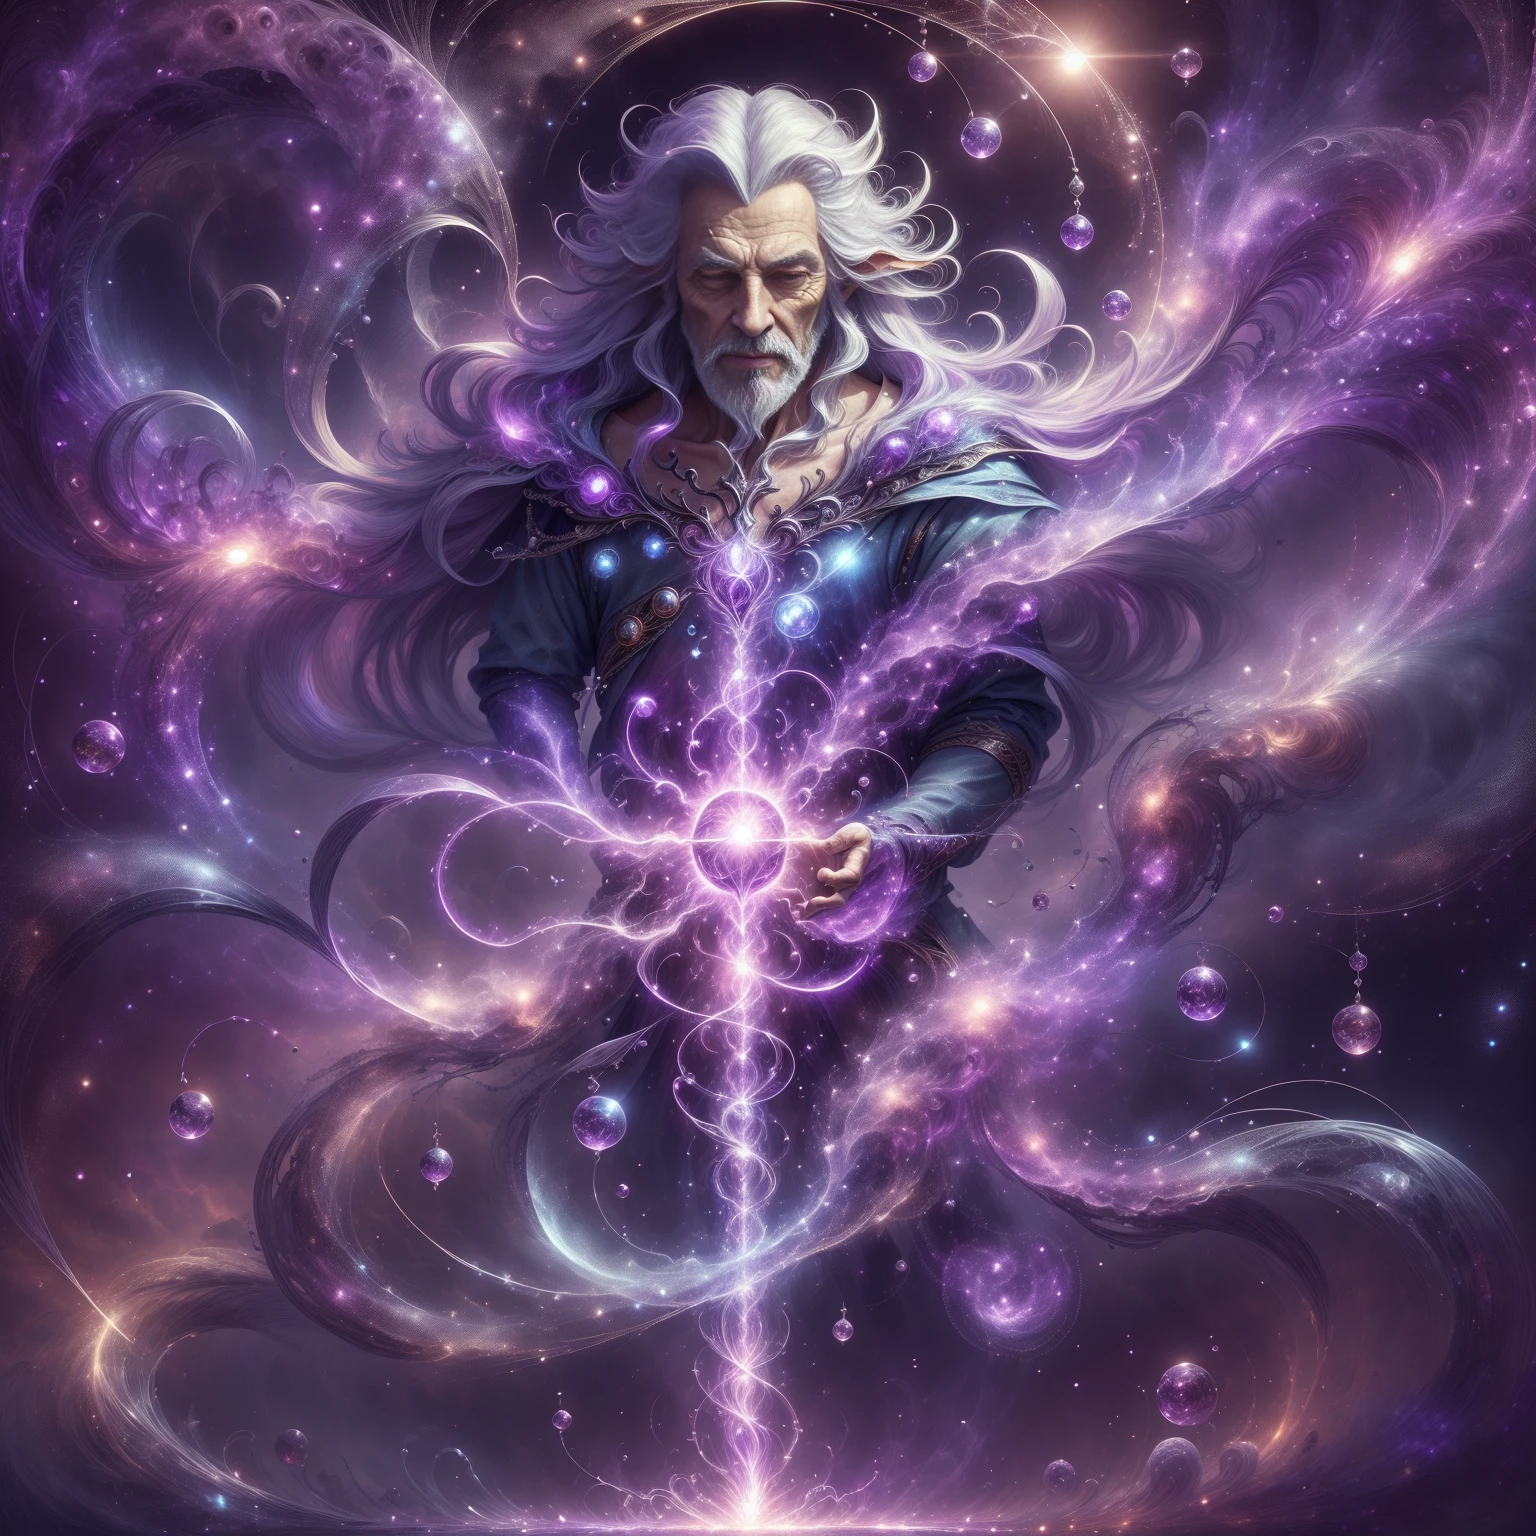 psionic magic , psychic energy  , Manaflow,   Shimmers,  Esper,  Background, Flying in the sky,  Gandalf, 
radiant eyes,  sorcerer,  Glowing hair , ,Full body,